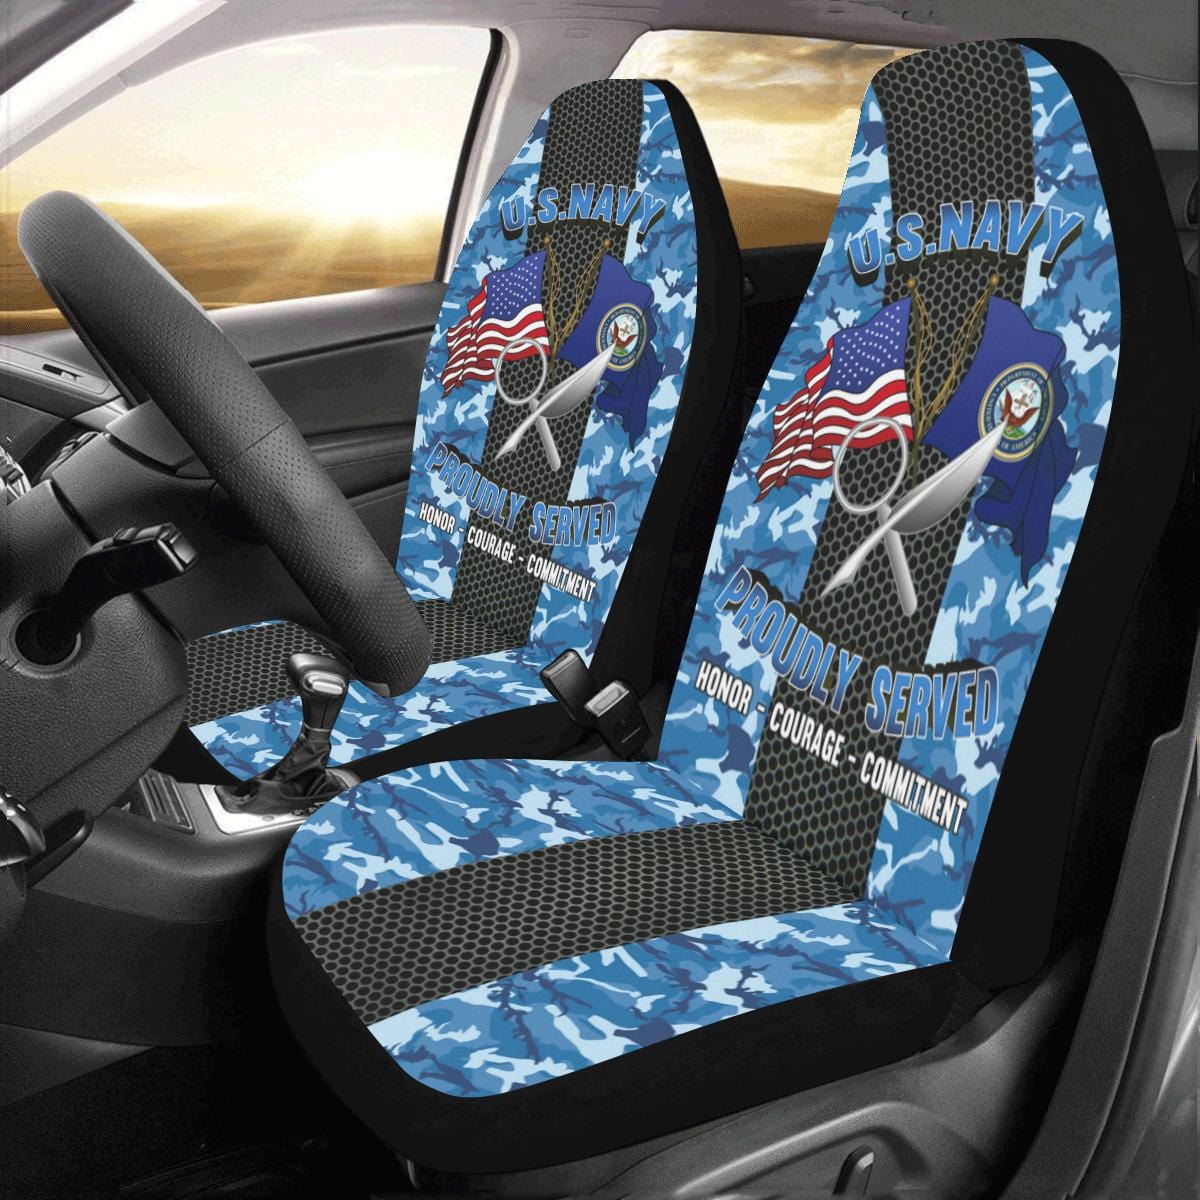 Navy Intelligence Specialist Navy IS Car Seat Covers (Set of 2)-SeatCovers-Navy-Rate-Veterans Nation